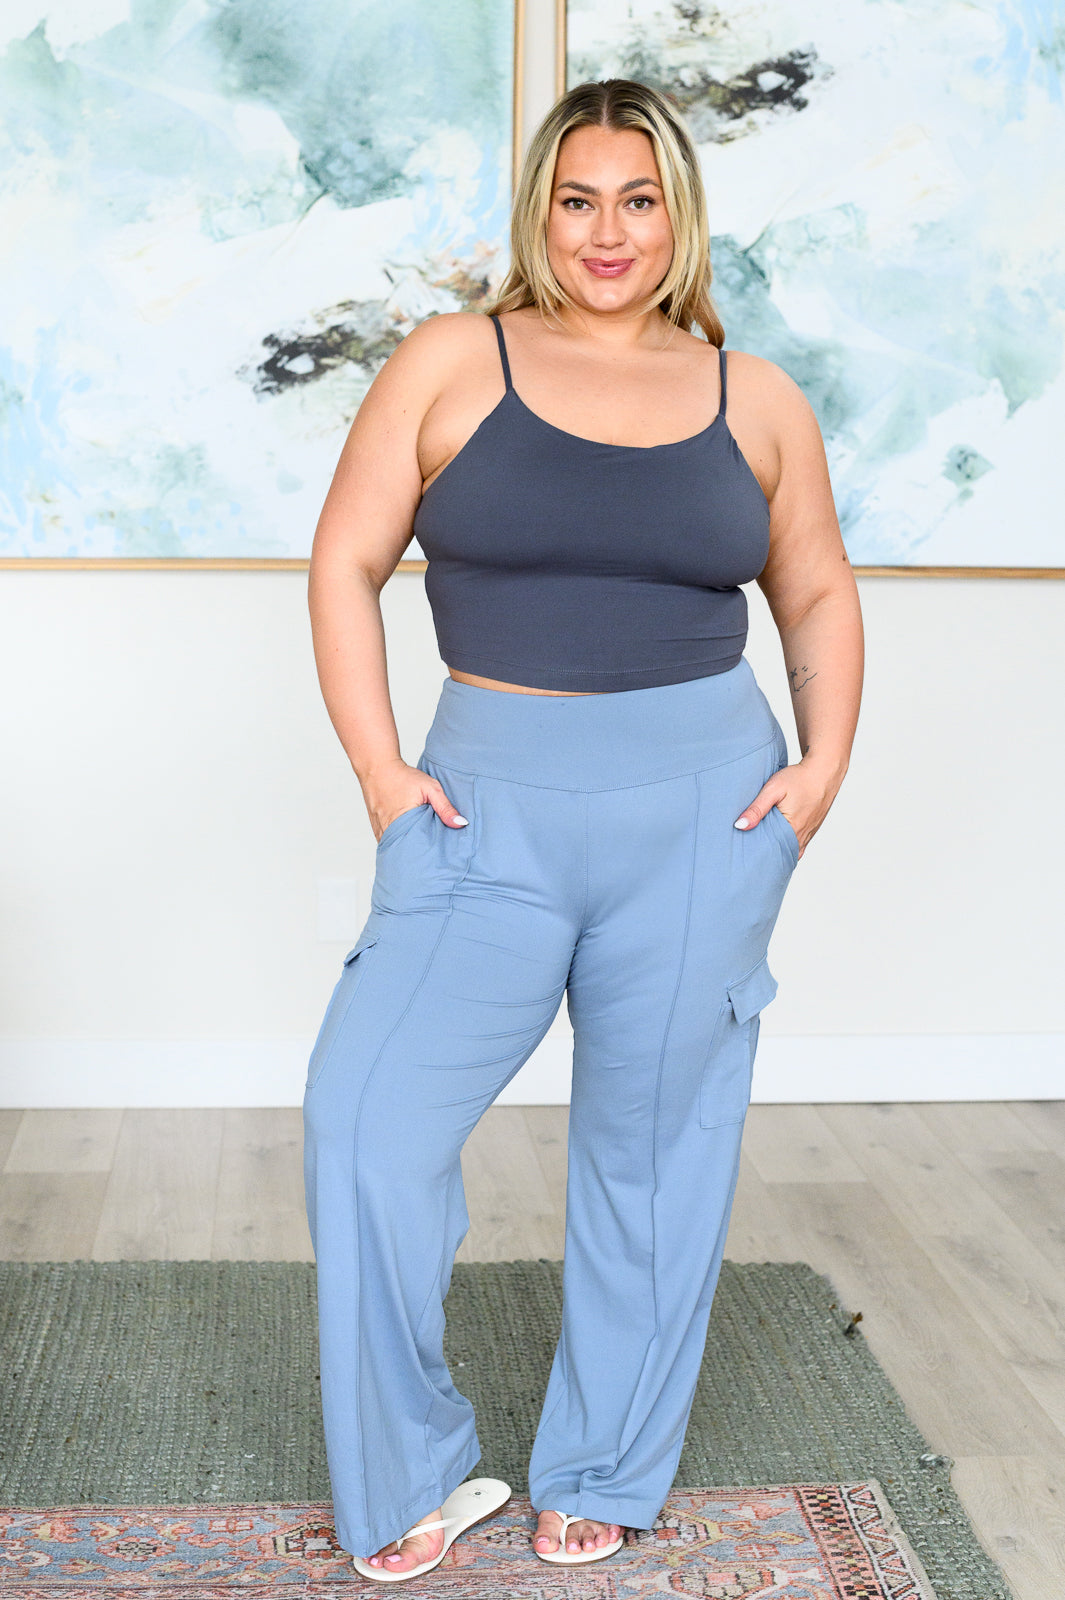 Race to Relax Cargo Pants in Chambray - FamFancy Boutique